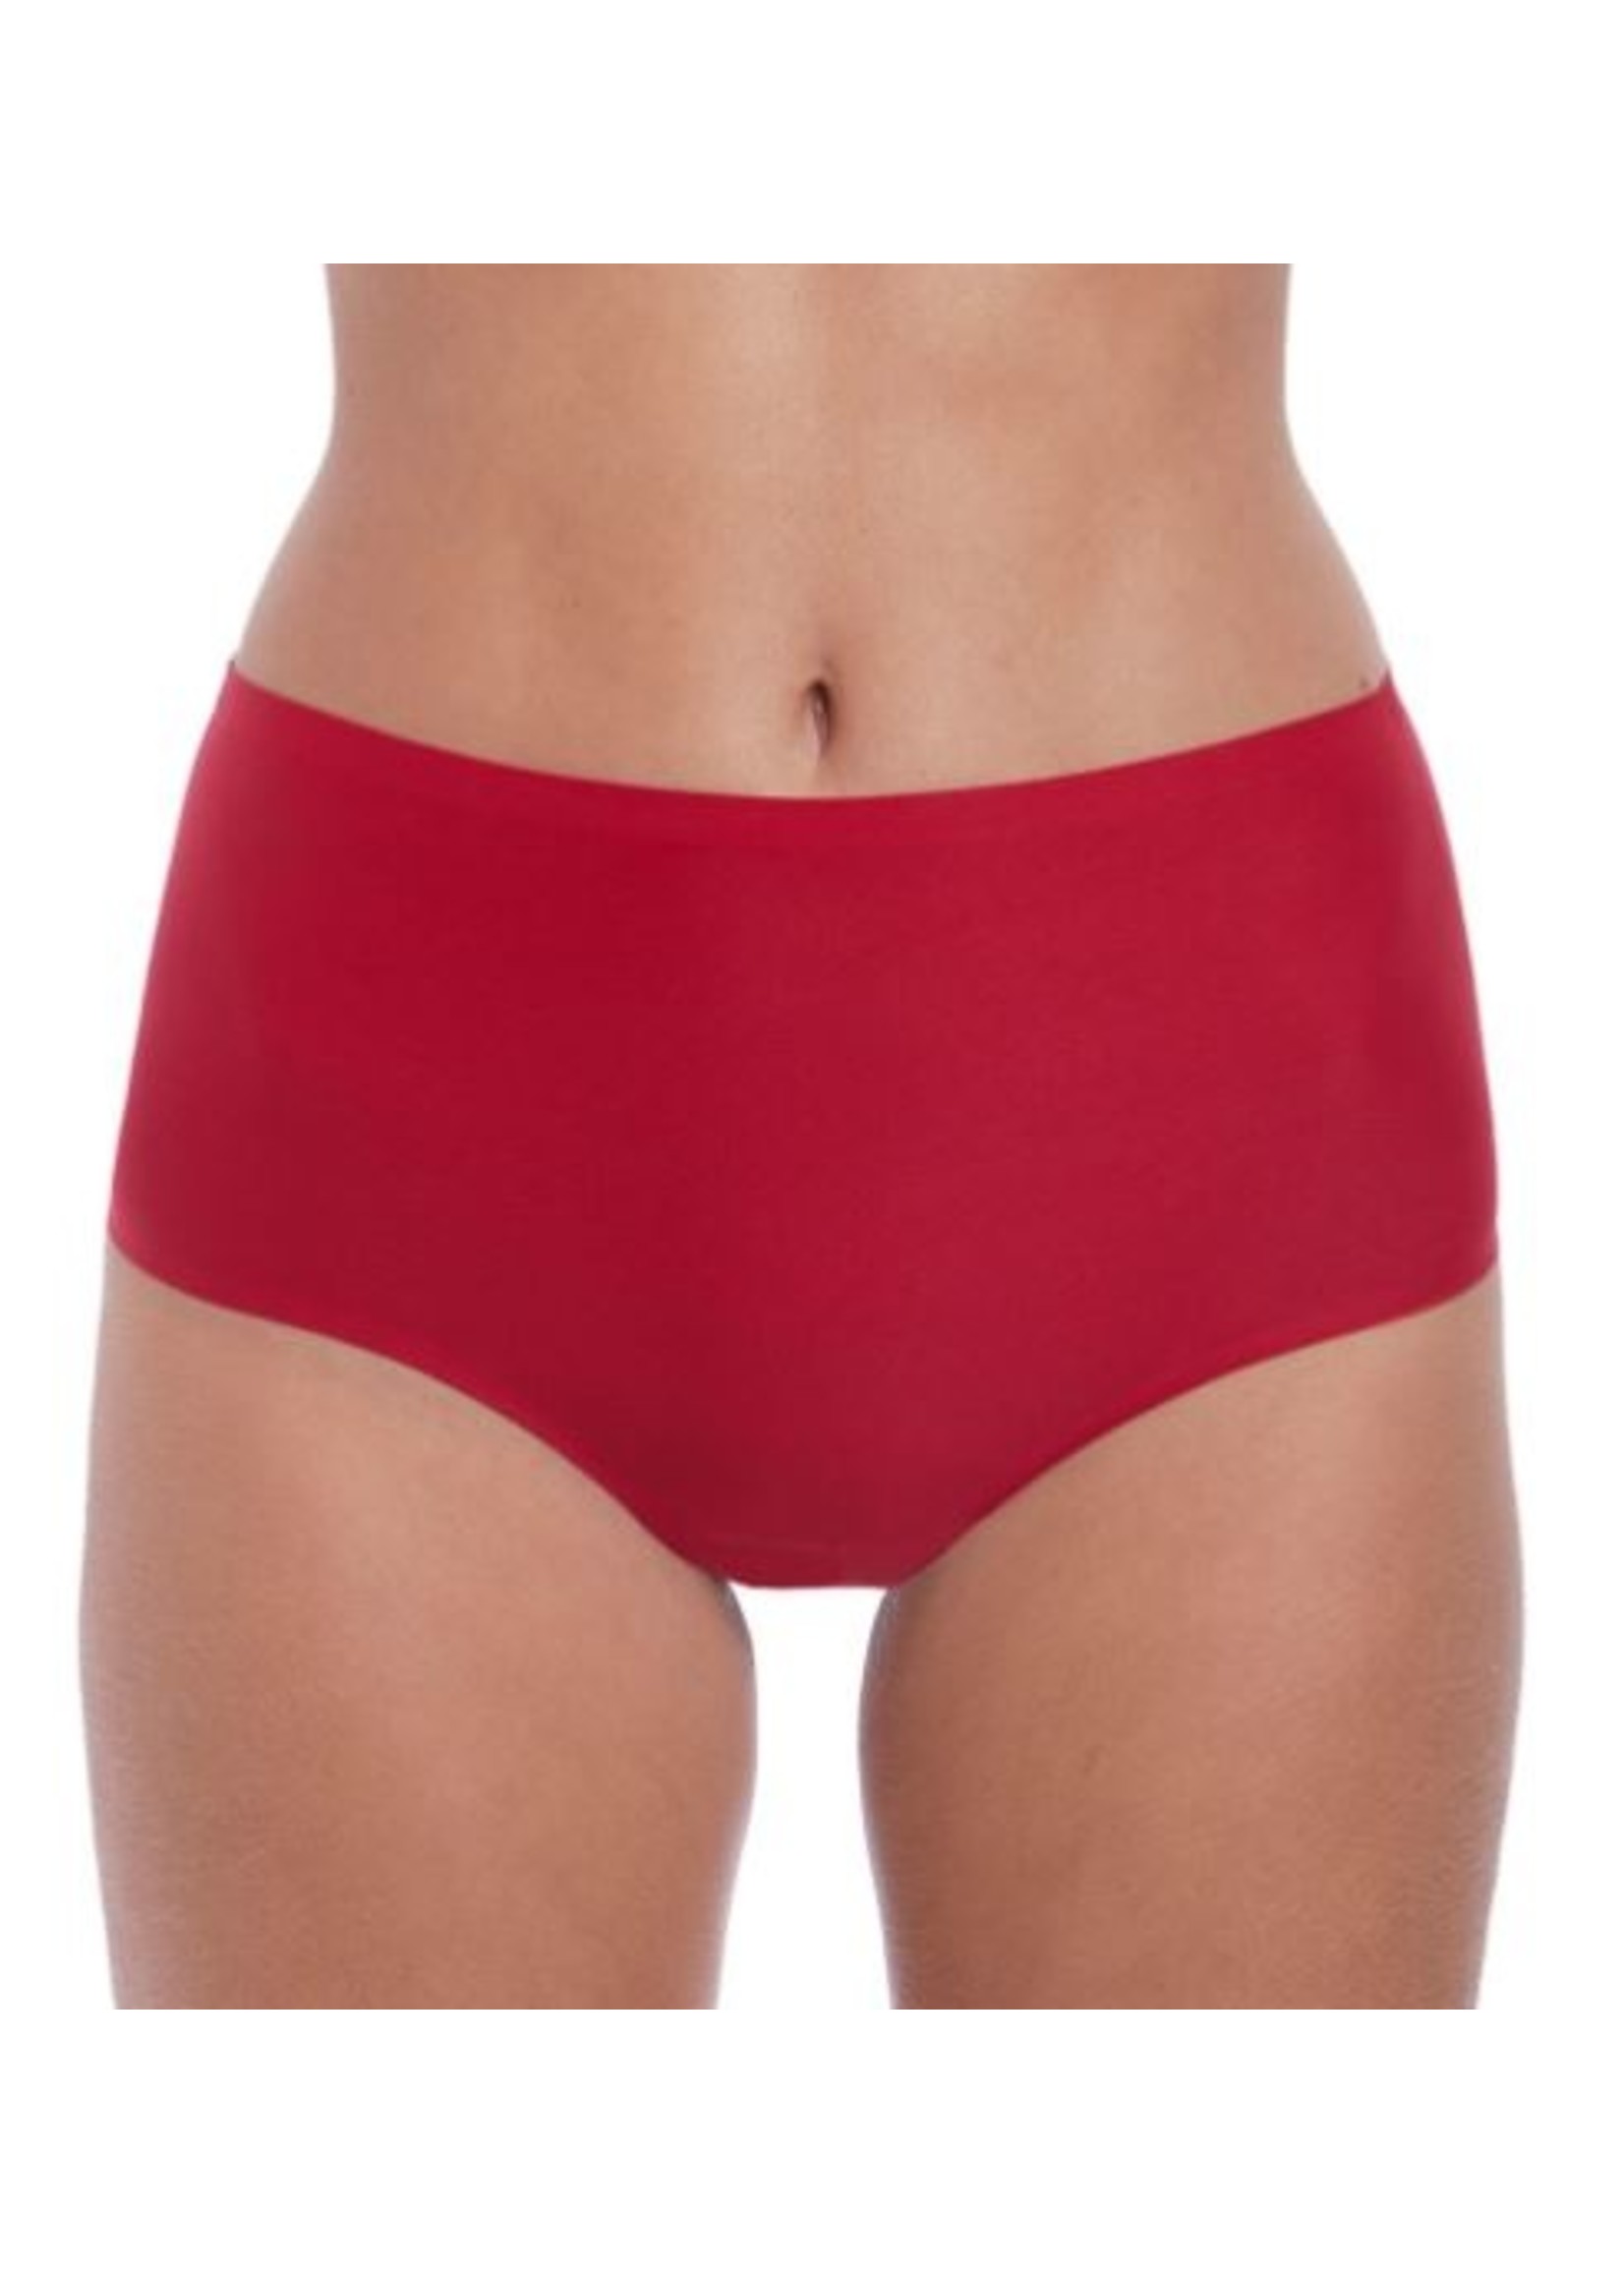 Women's Invisibly Smooth Brief Panty, Style 4813383